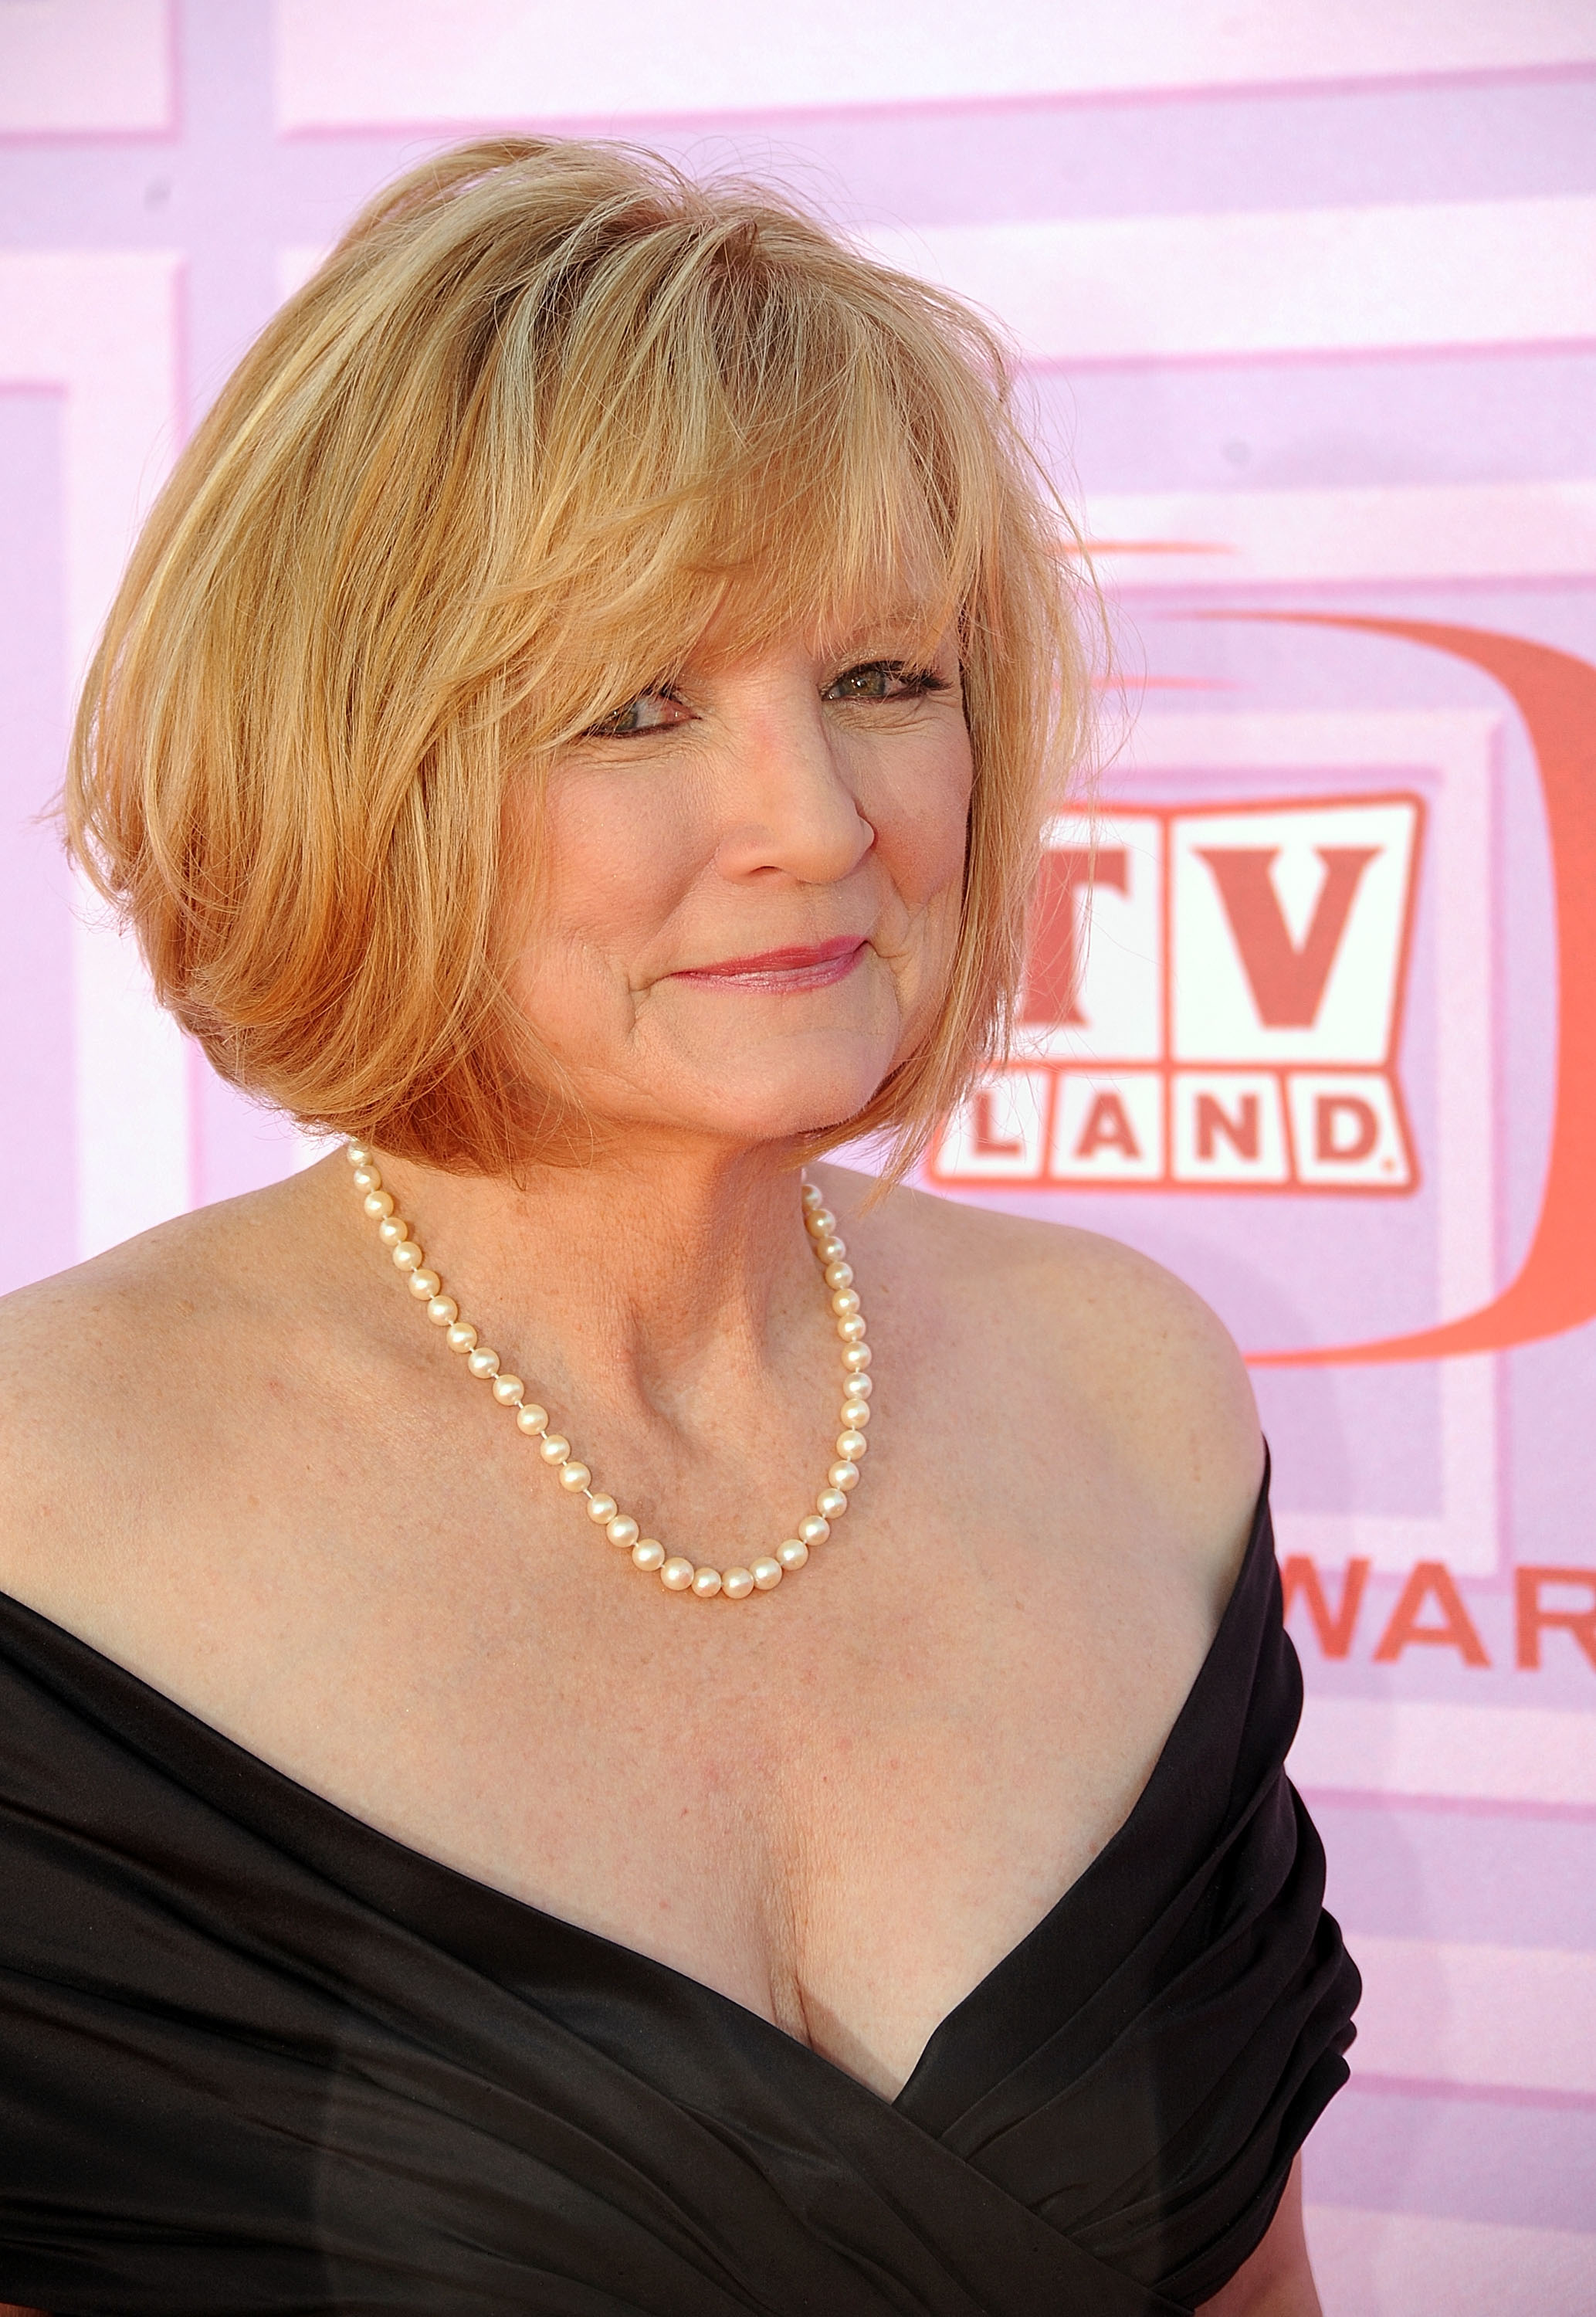 Constance McCashin arrives at the 7th Annual TV Land Awards held at Gibson Amphitheatre in Universal City, California, on April 19, 2009. | Source: Getty Images